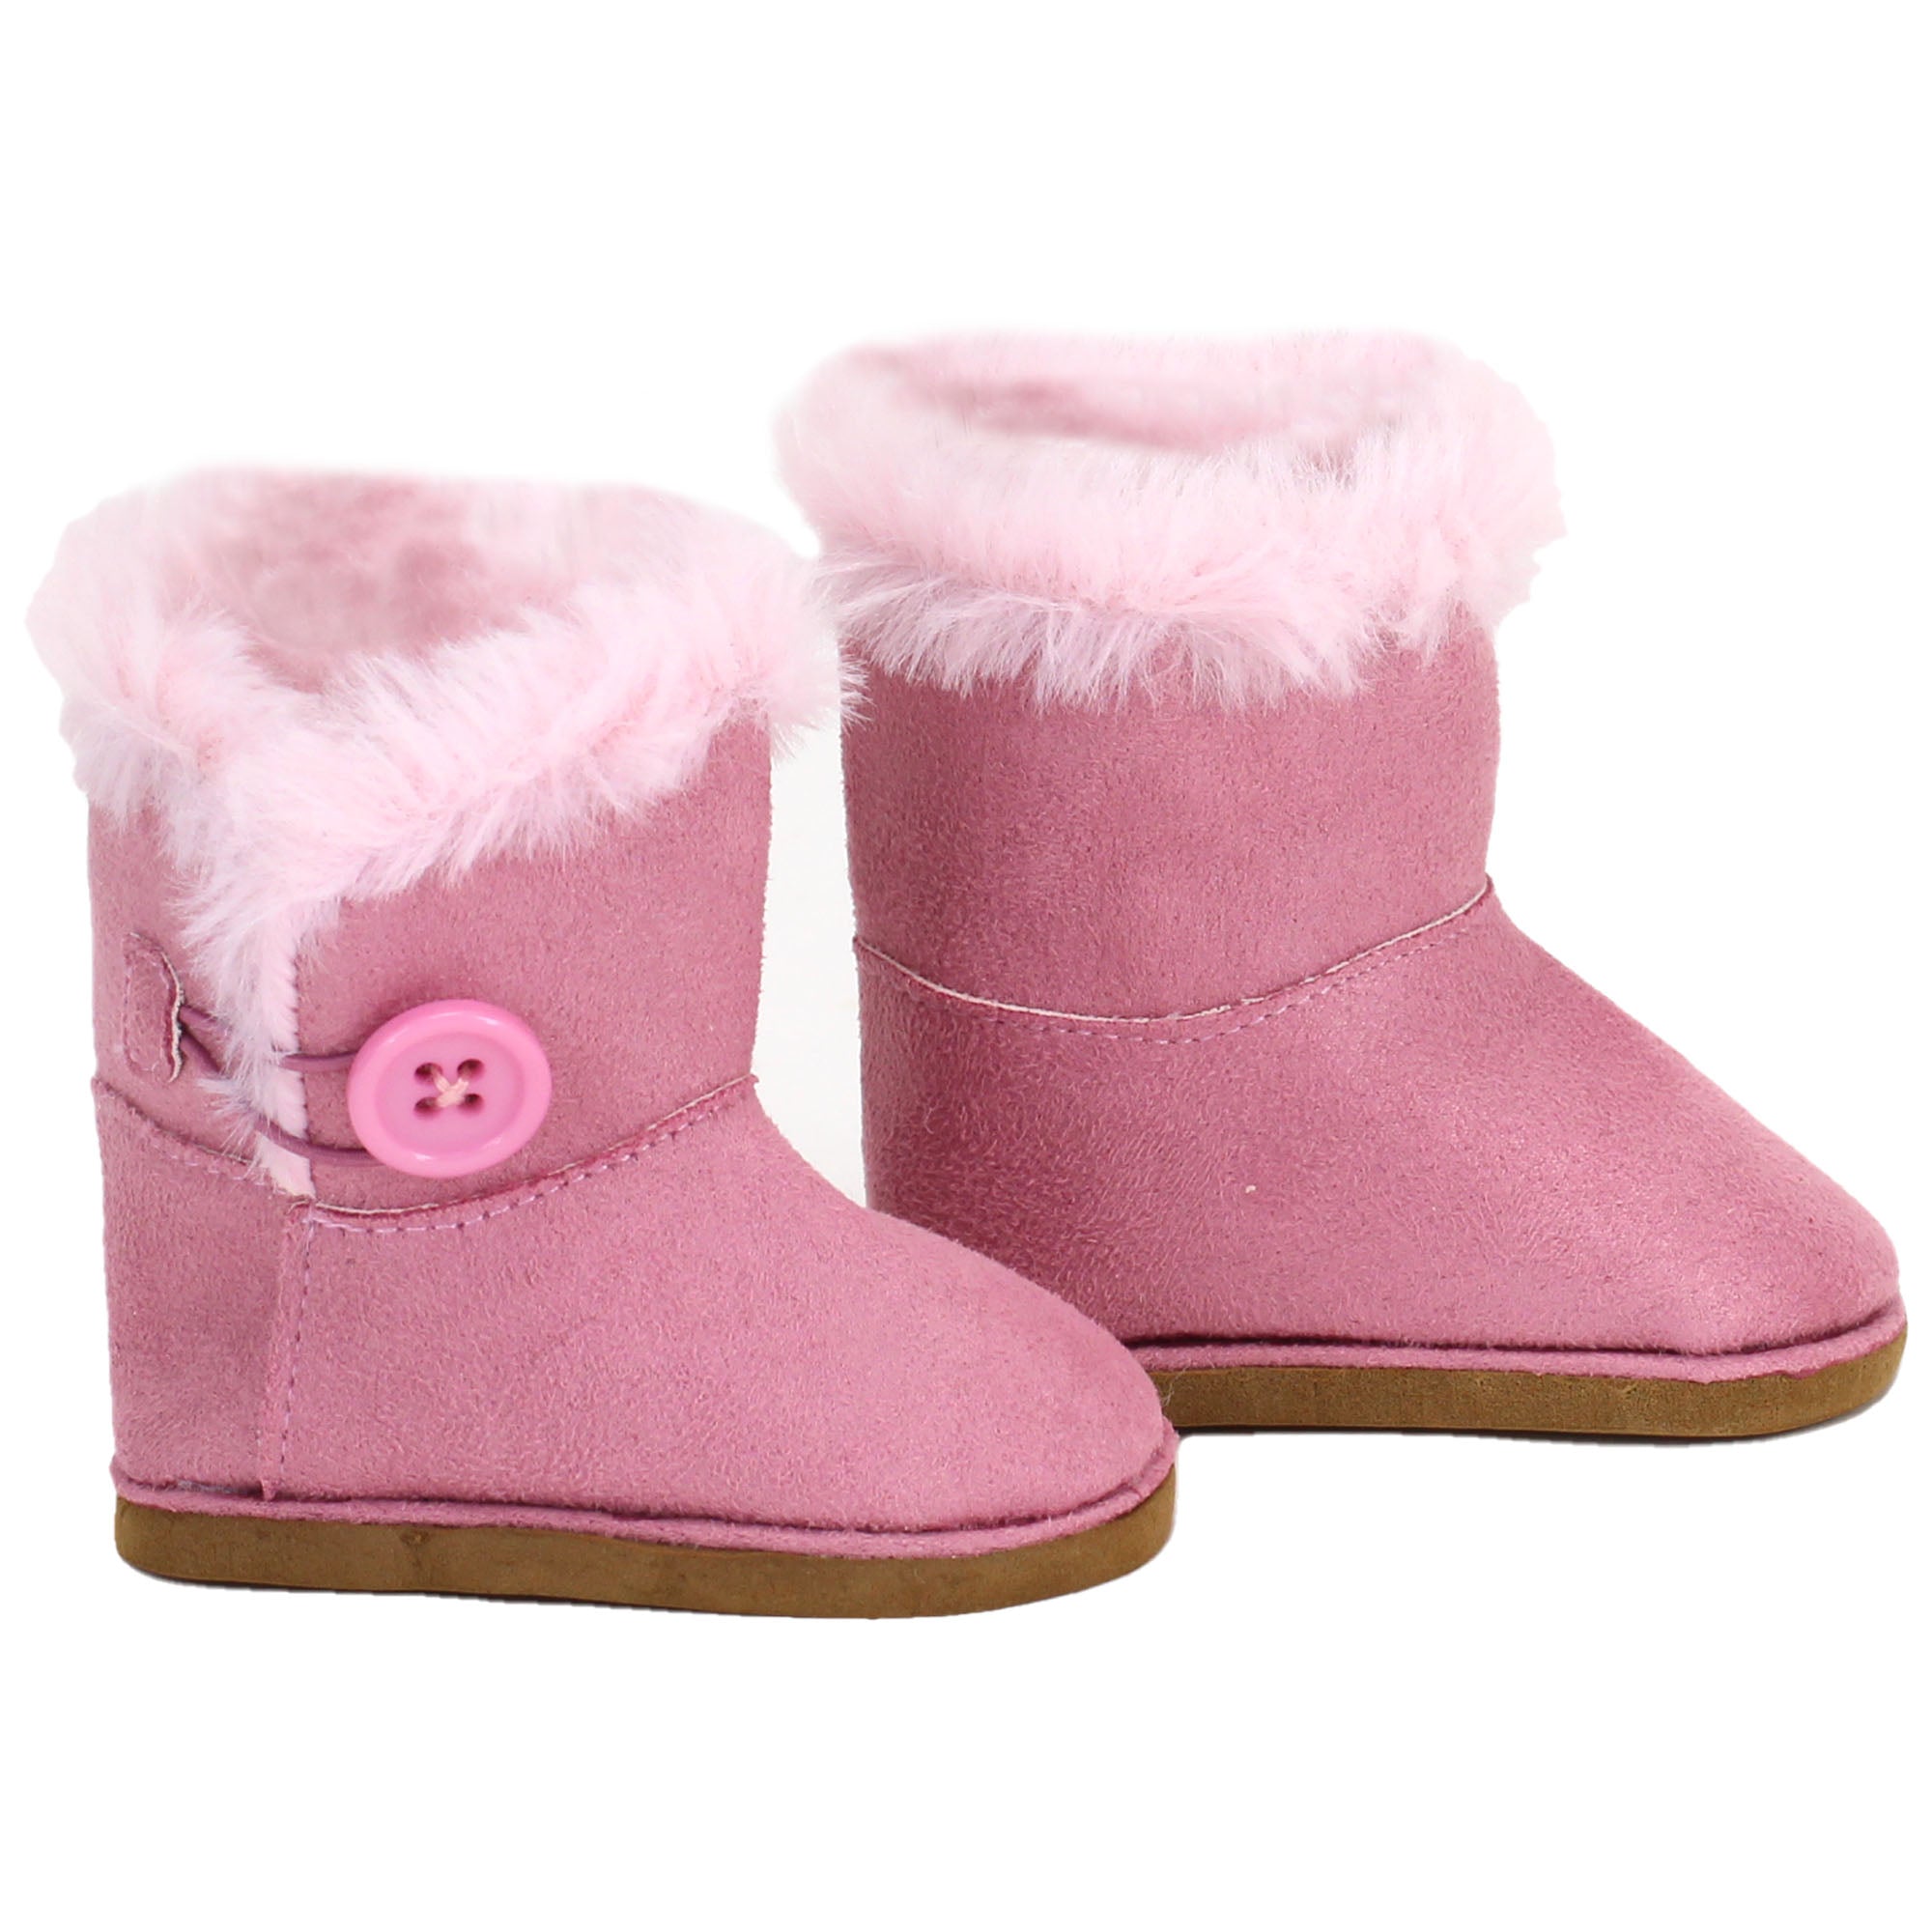 Sophia's Winter Boots for 18" Dolls, Pink